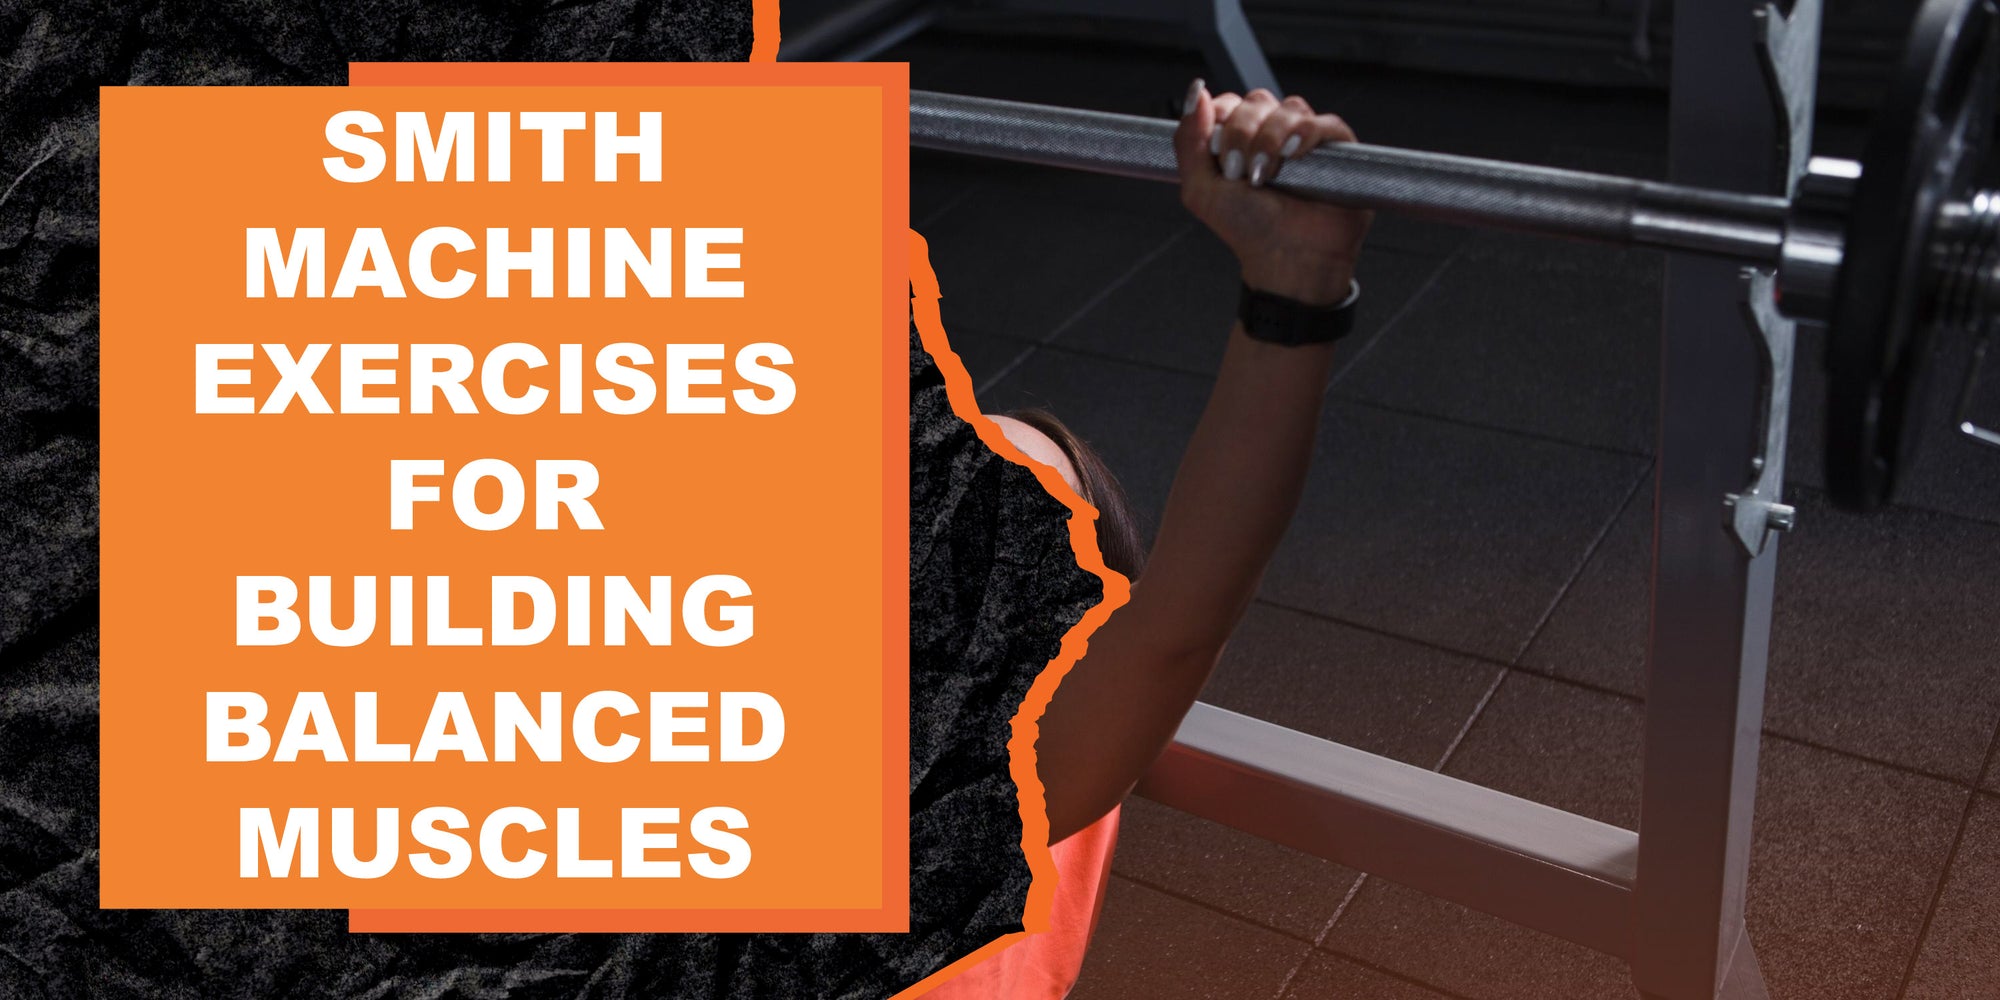 Smith Machine Exercises for Building Balanced Muscles